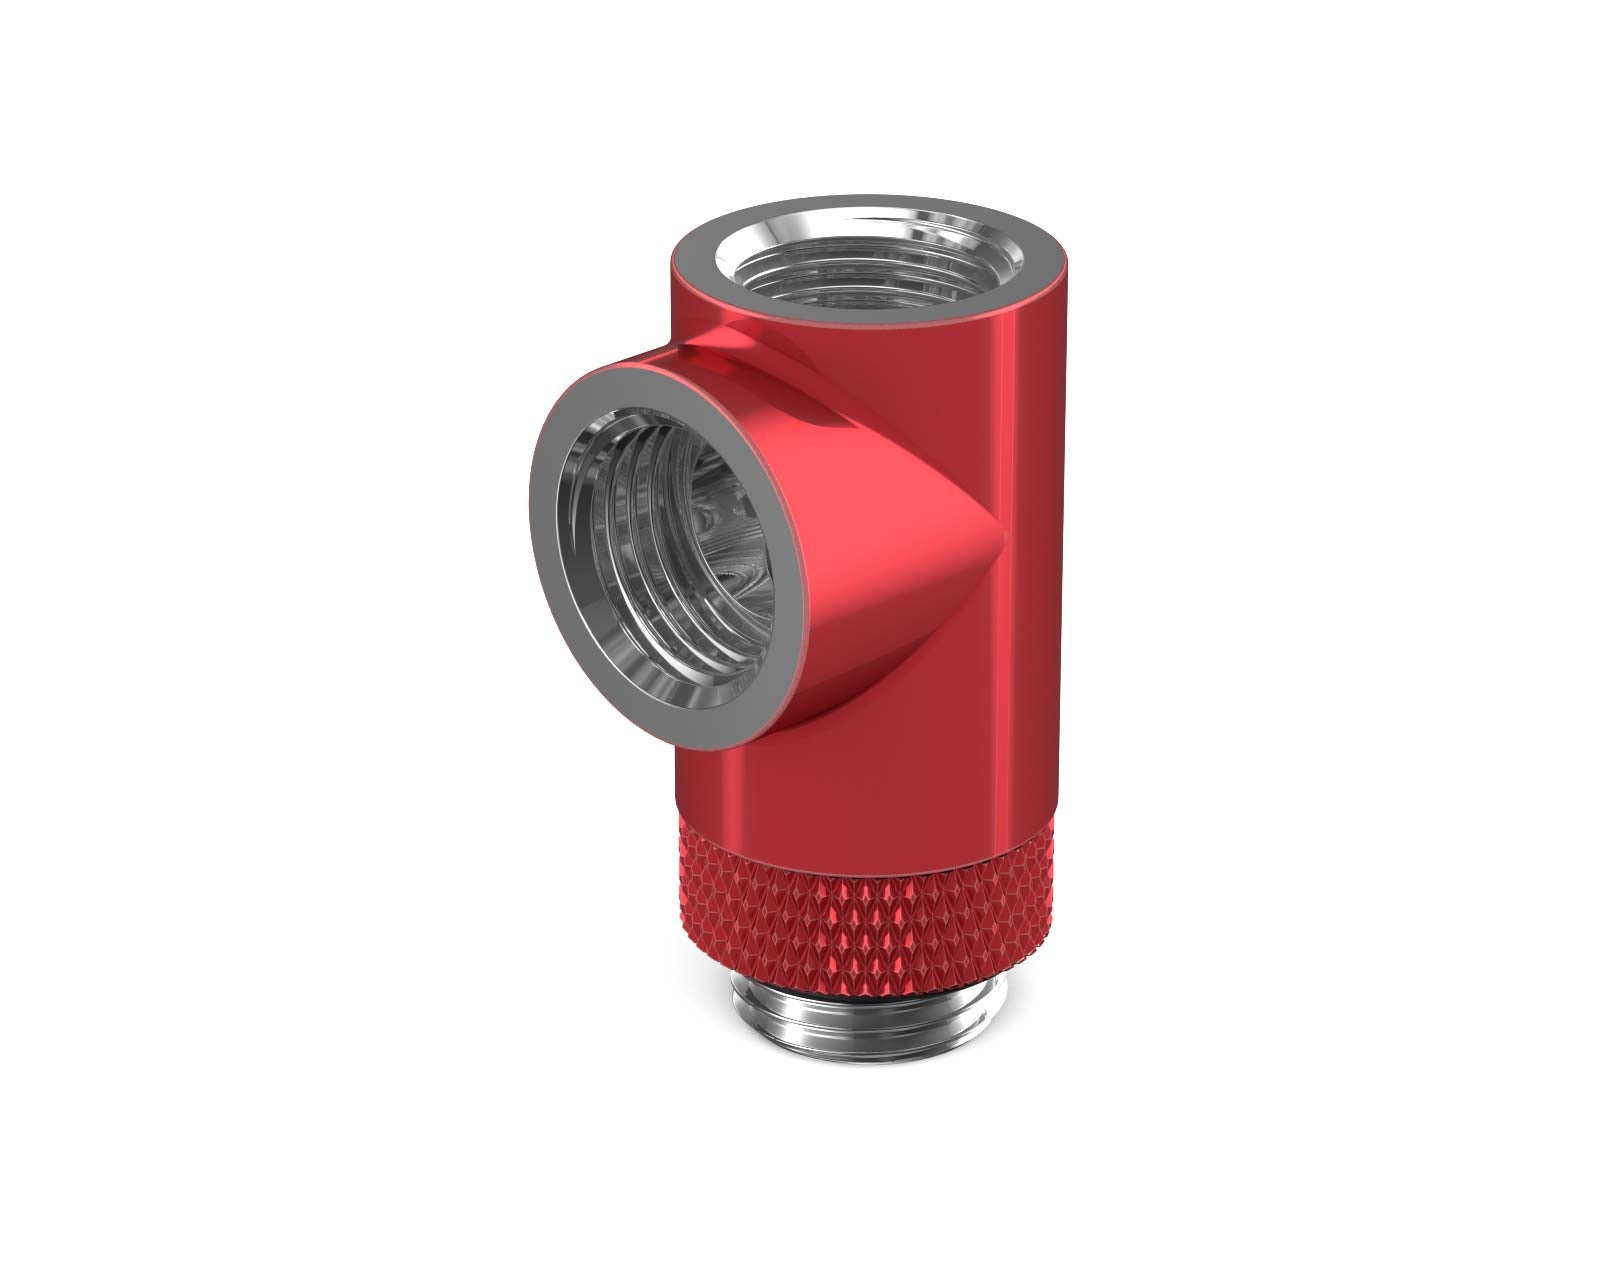 PrimoChill G 1/4in. Inline Rotary 3-Way SX Female T Adapter - PrimoChill - KEEPING IT COOL Candy Red